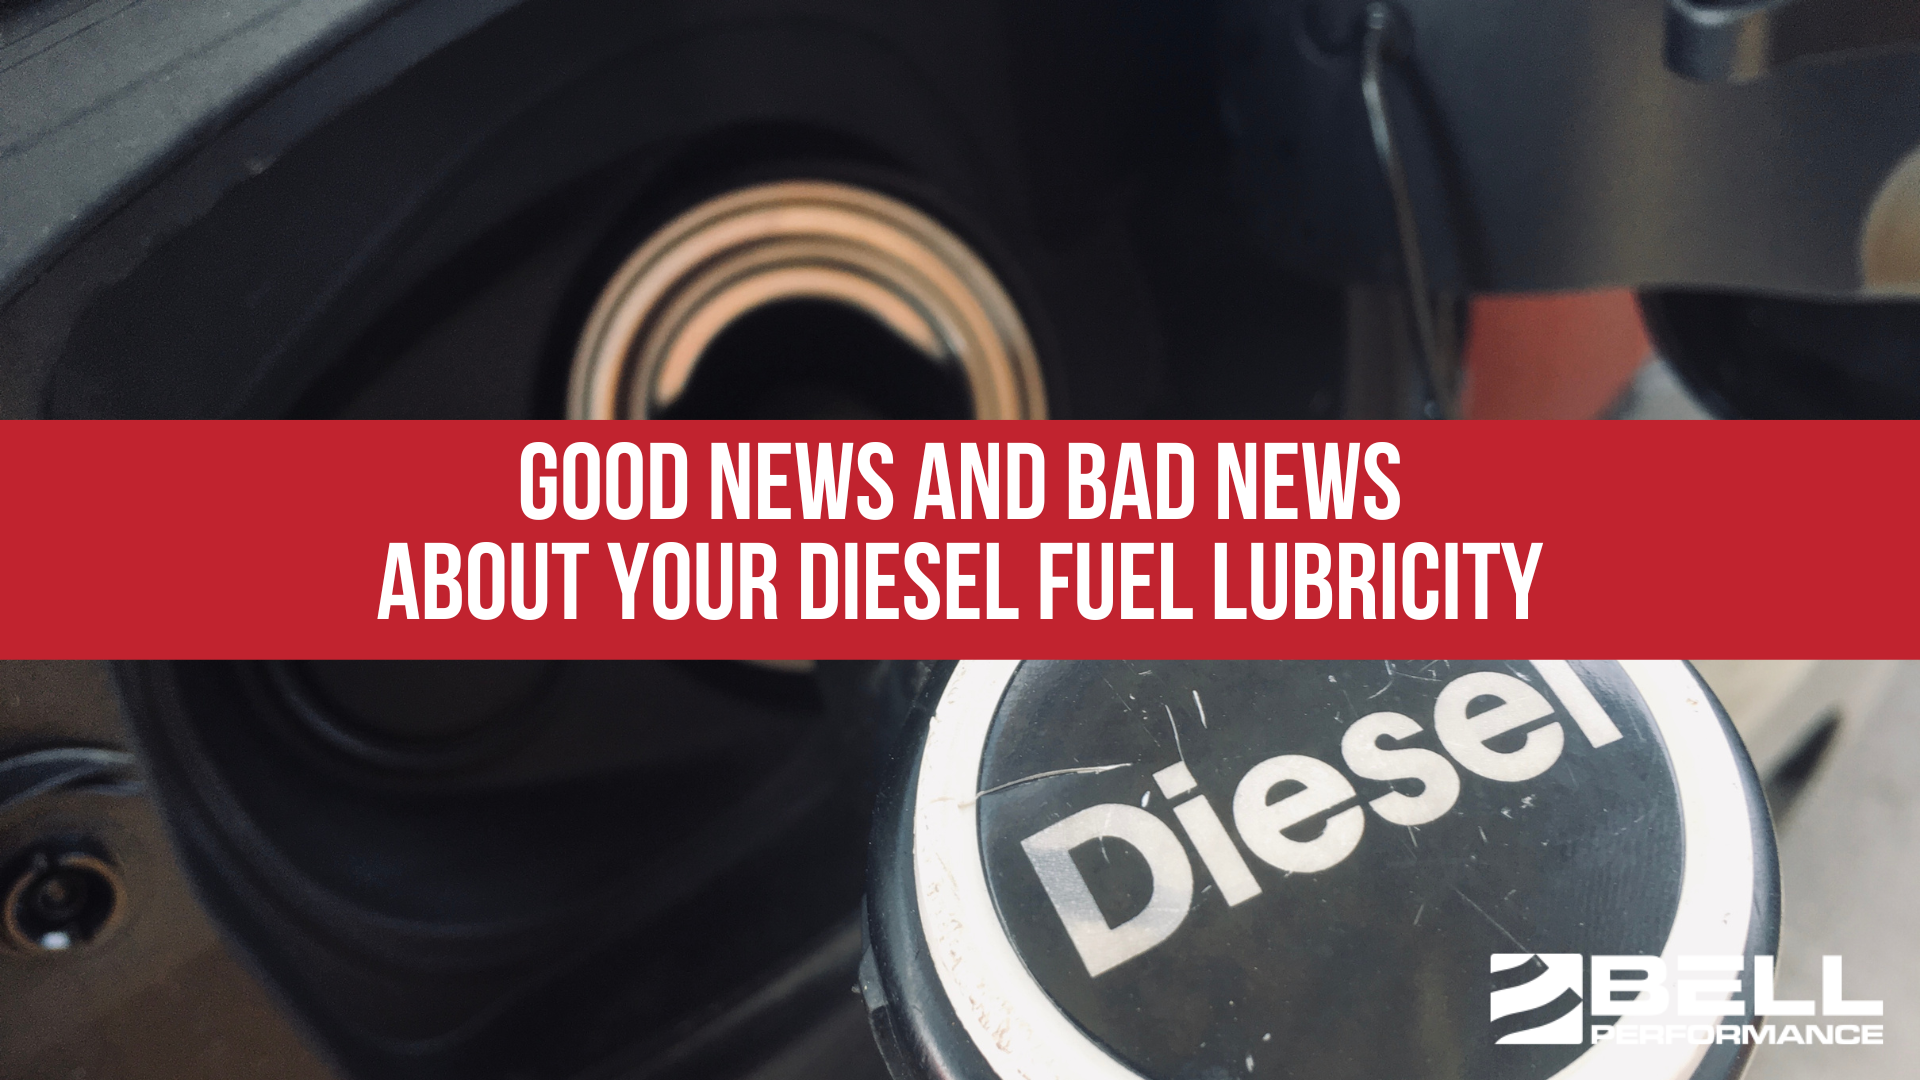 Good news and bad news about your diesel fuel lubricity